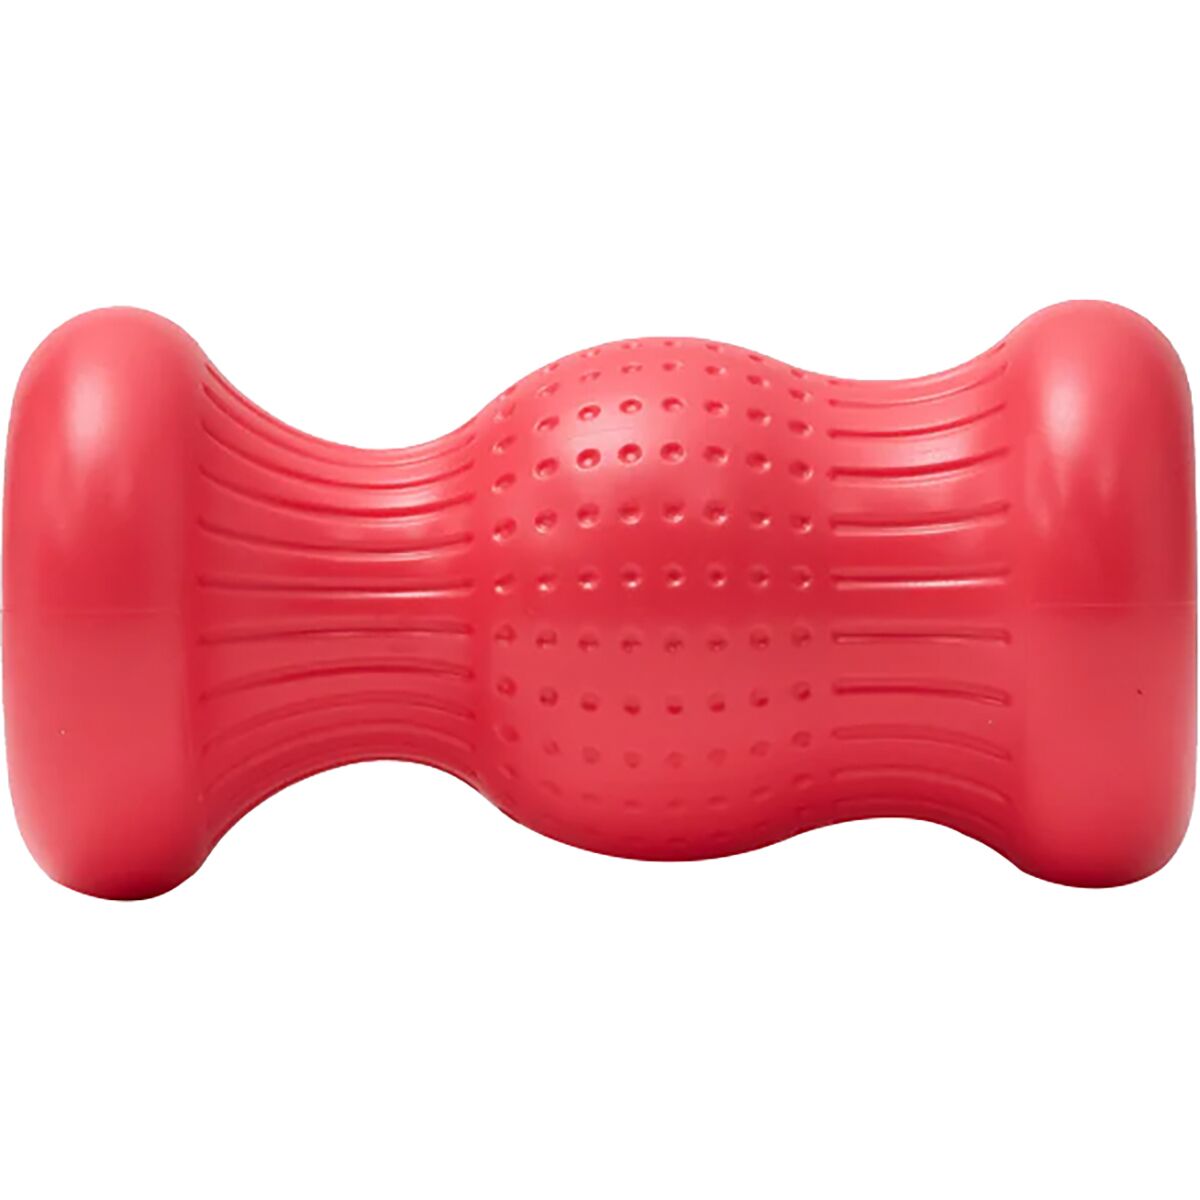 Roll Recovery R3 Orthopedic Foot Roller